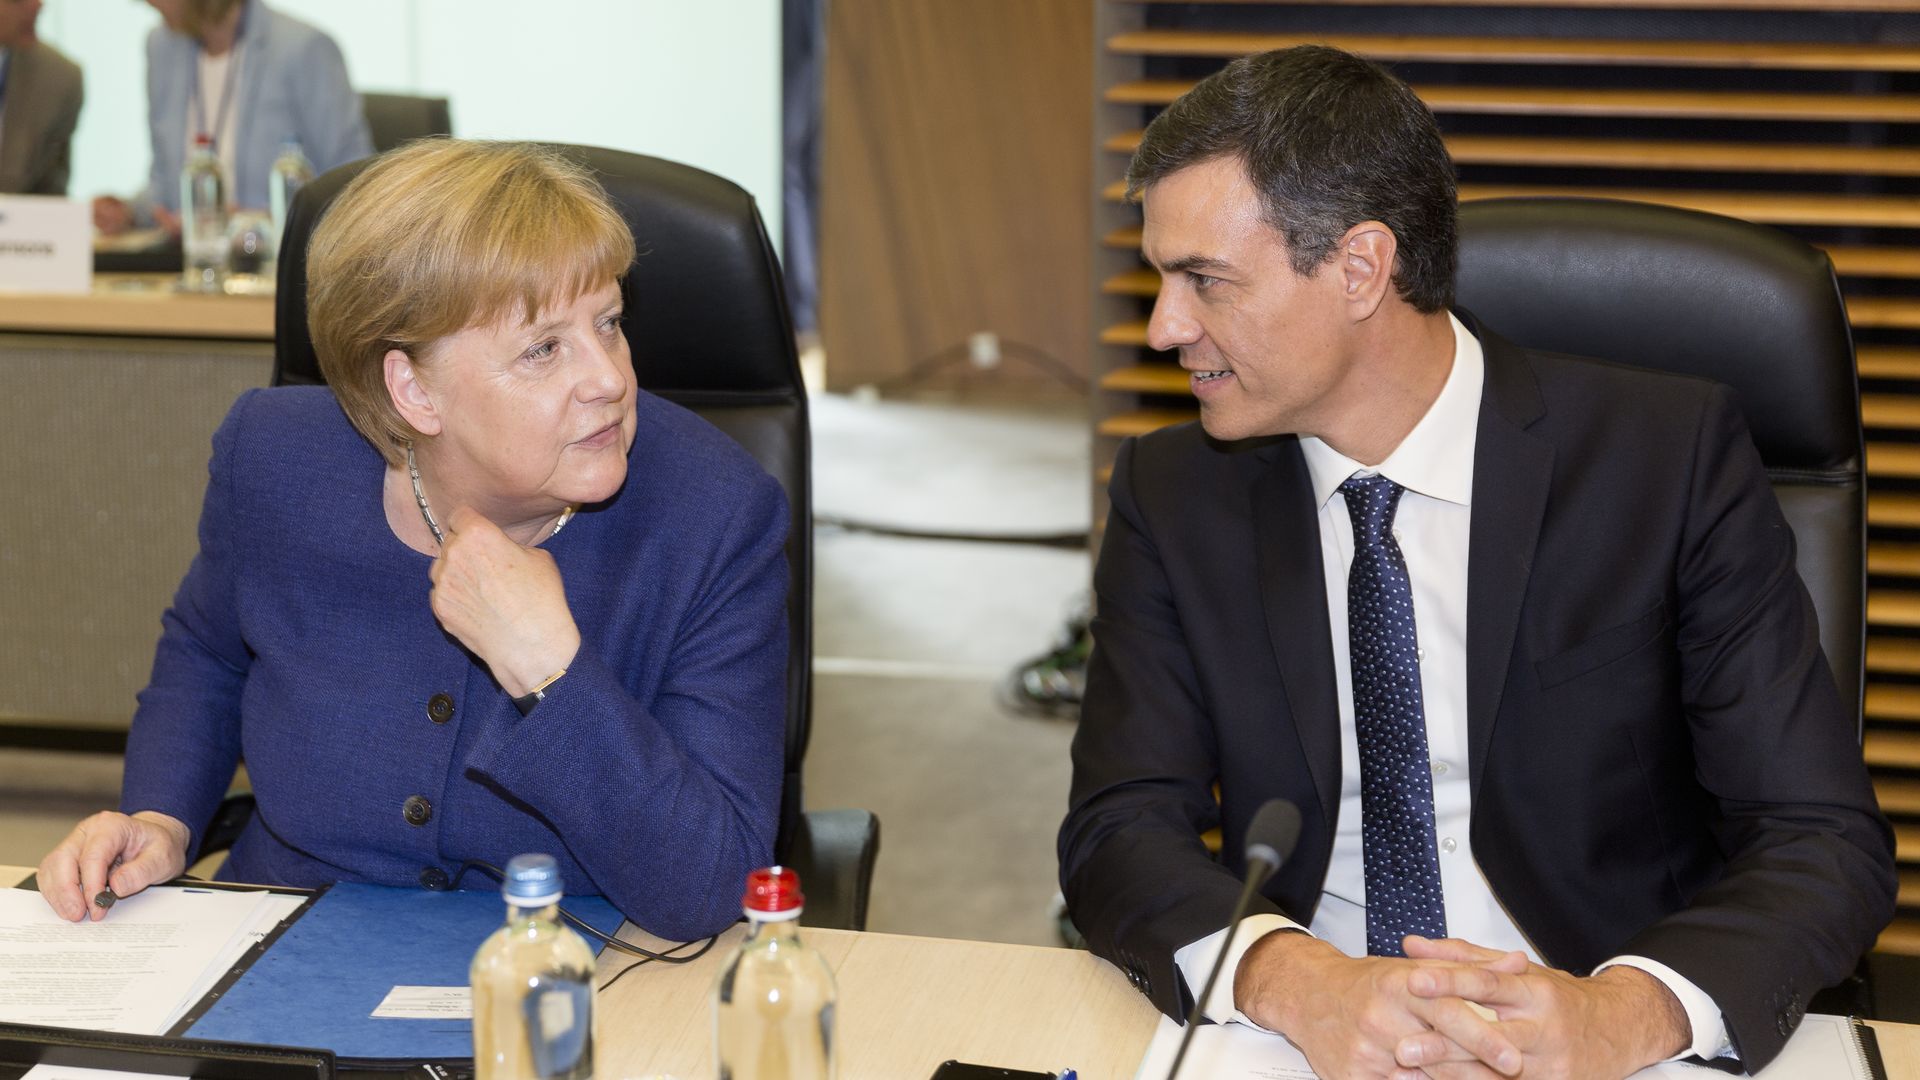 German Chancellor Angela Merke talks with Spanish Prime Minister Pedro Sanchez before a meeting on migration and asylum issues on June 24, 2018 in Brussels, Belgium.